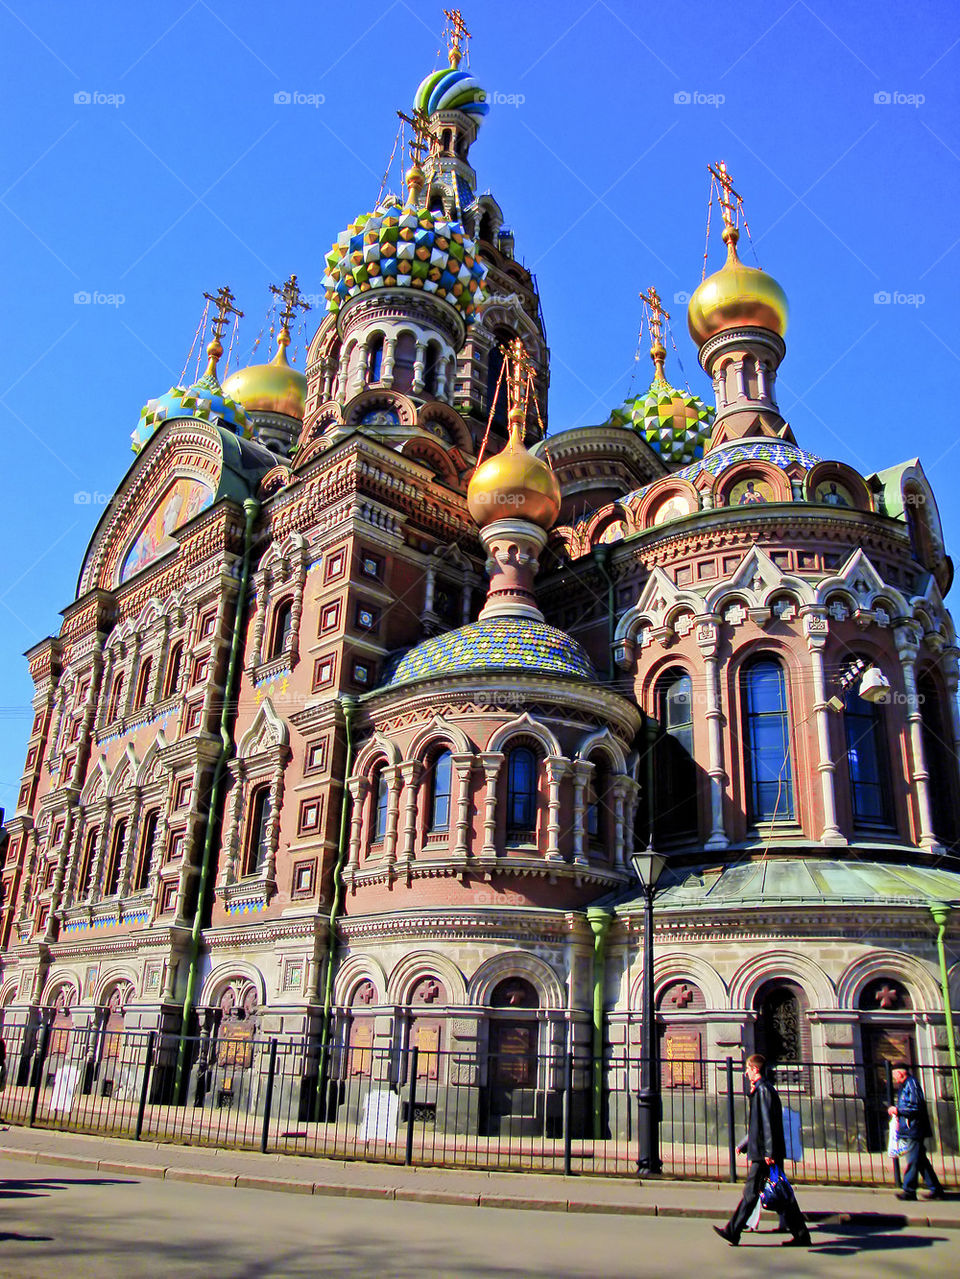 The Church of the Savior on Spilled Blood,